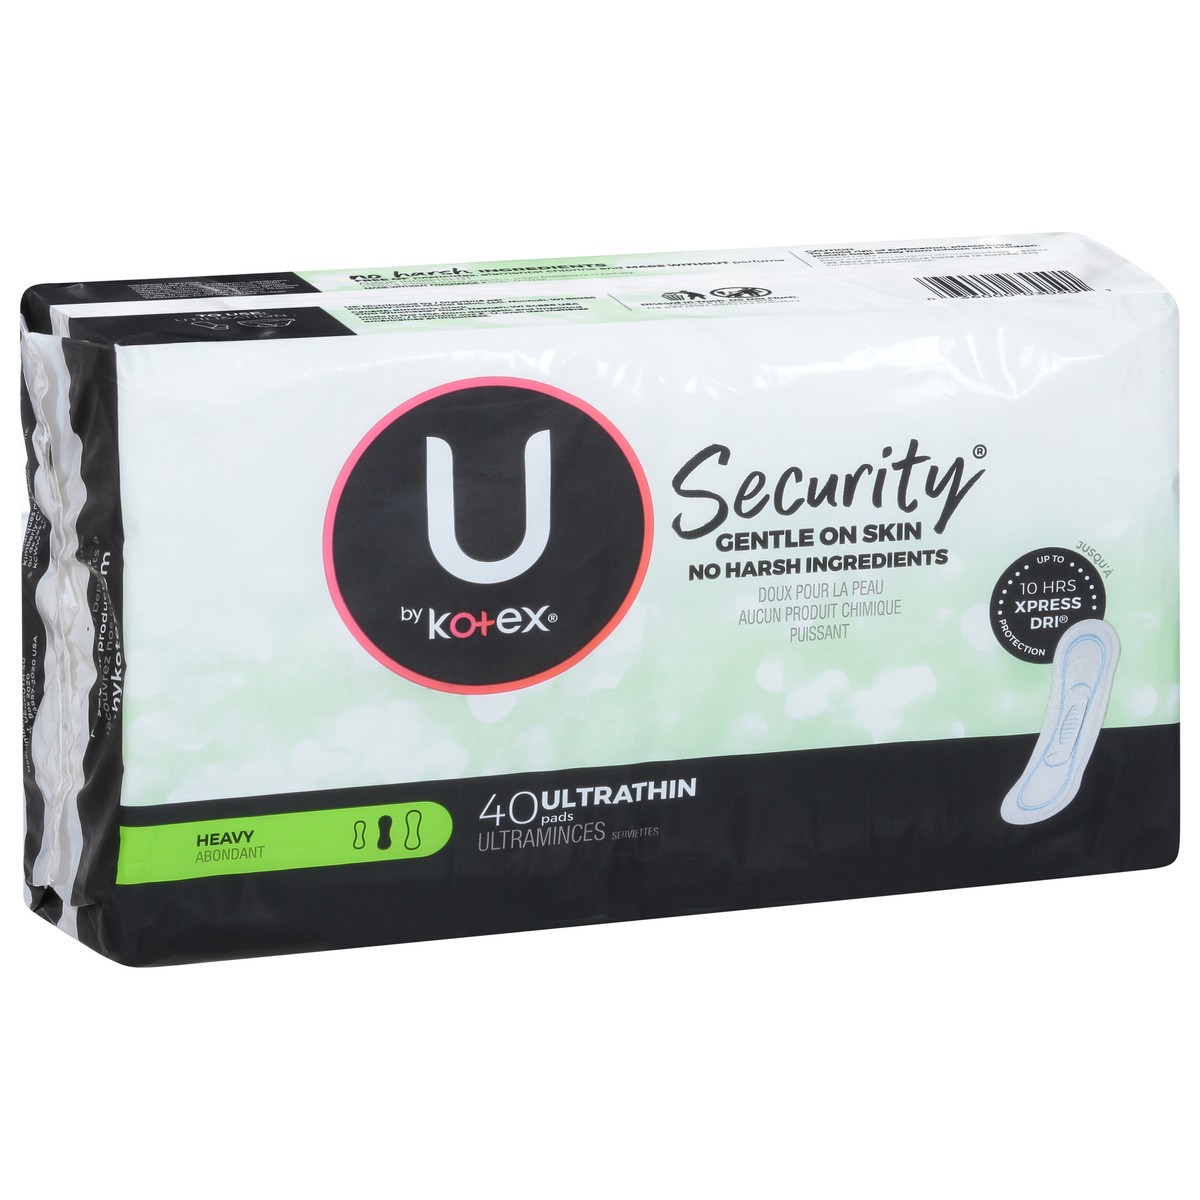 slide 14 of 16, U by Kotex Security Heavy Ultra Thin Pads 40 ea, 40 ct